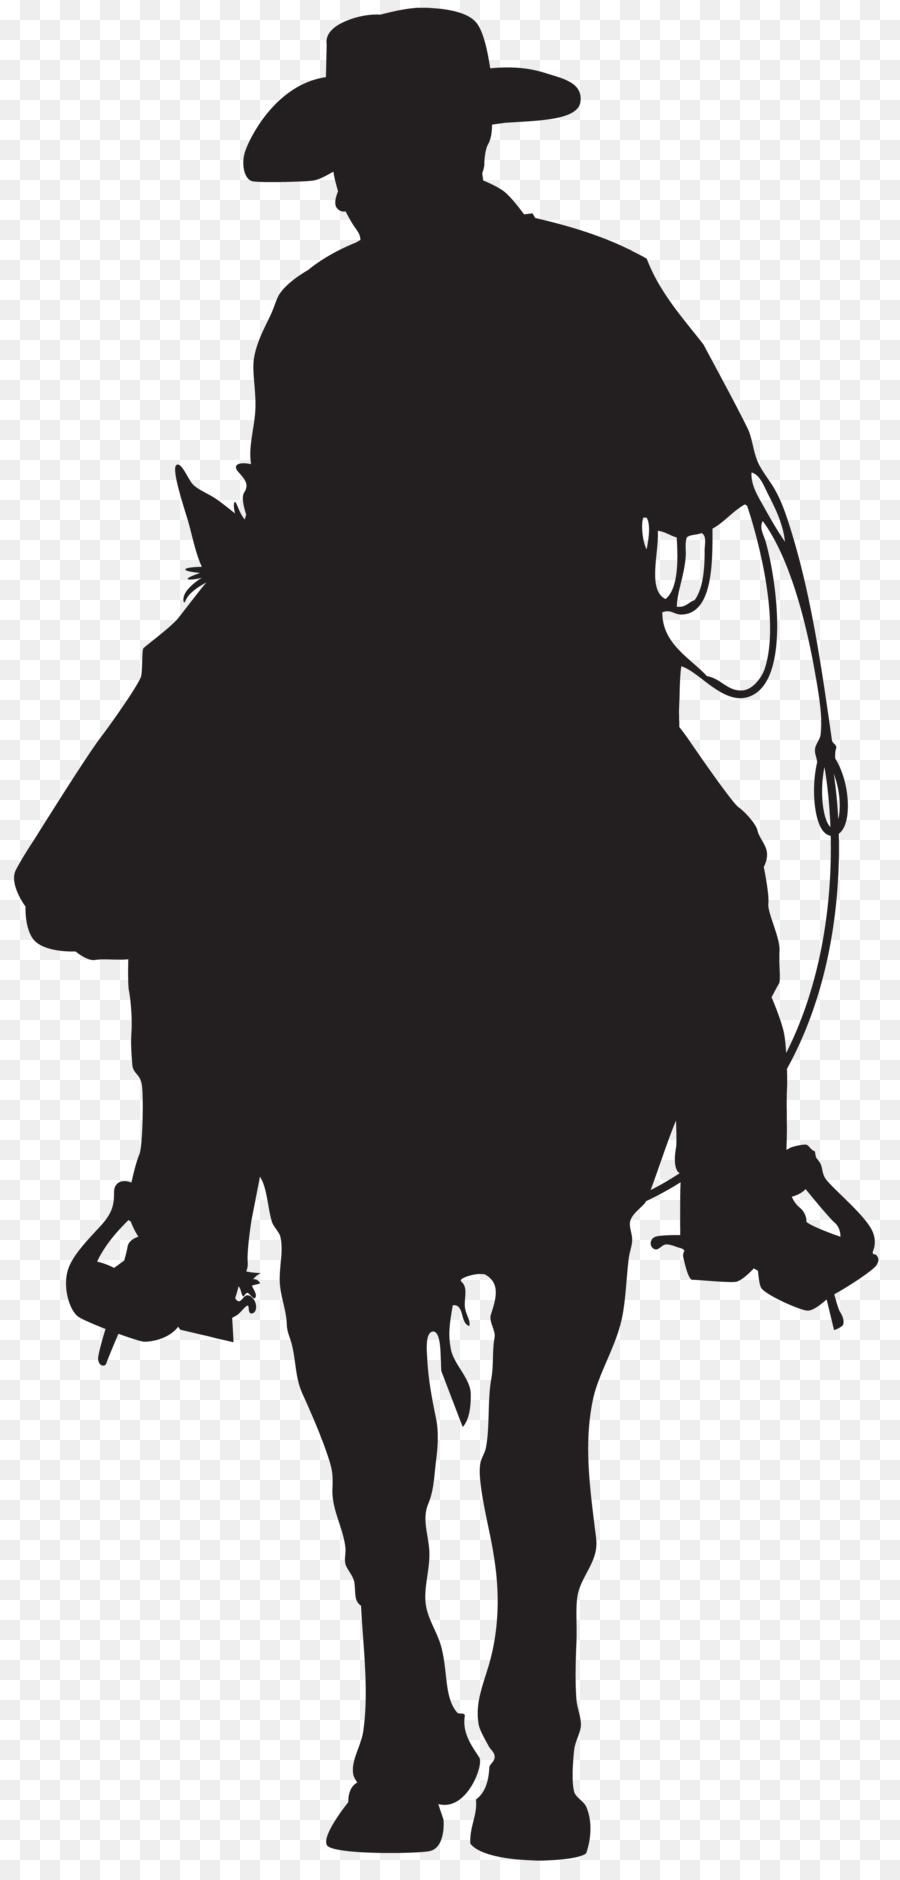 American frontier Cowboy Silhouette Clip art - cowboy png download - 3842*8000 - Free Transparent American Frontier png Download.